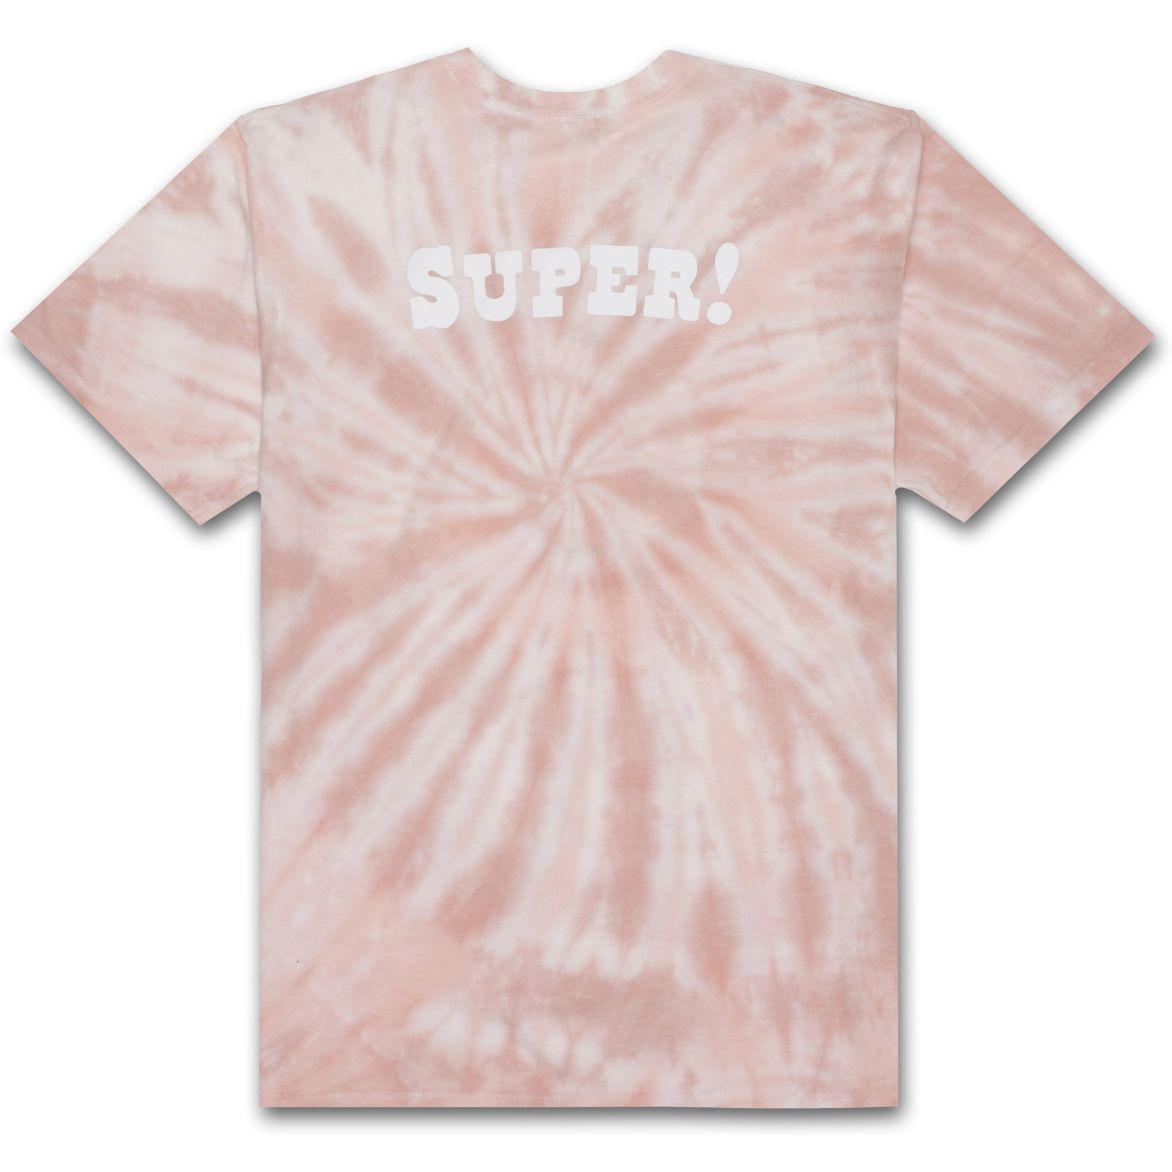 HUF X SOUTH PARK BIG GAY AL TIE-DYE TEE // PINK-The Collateral